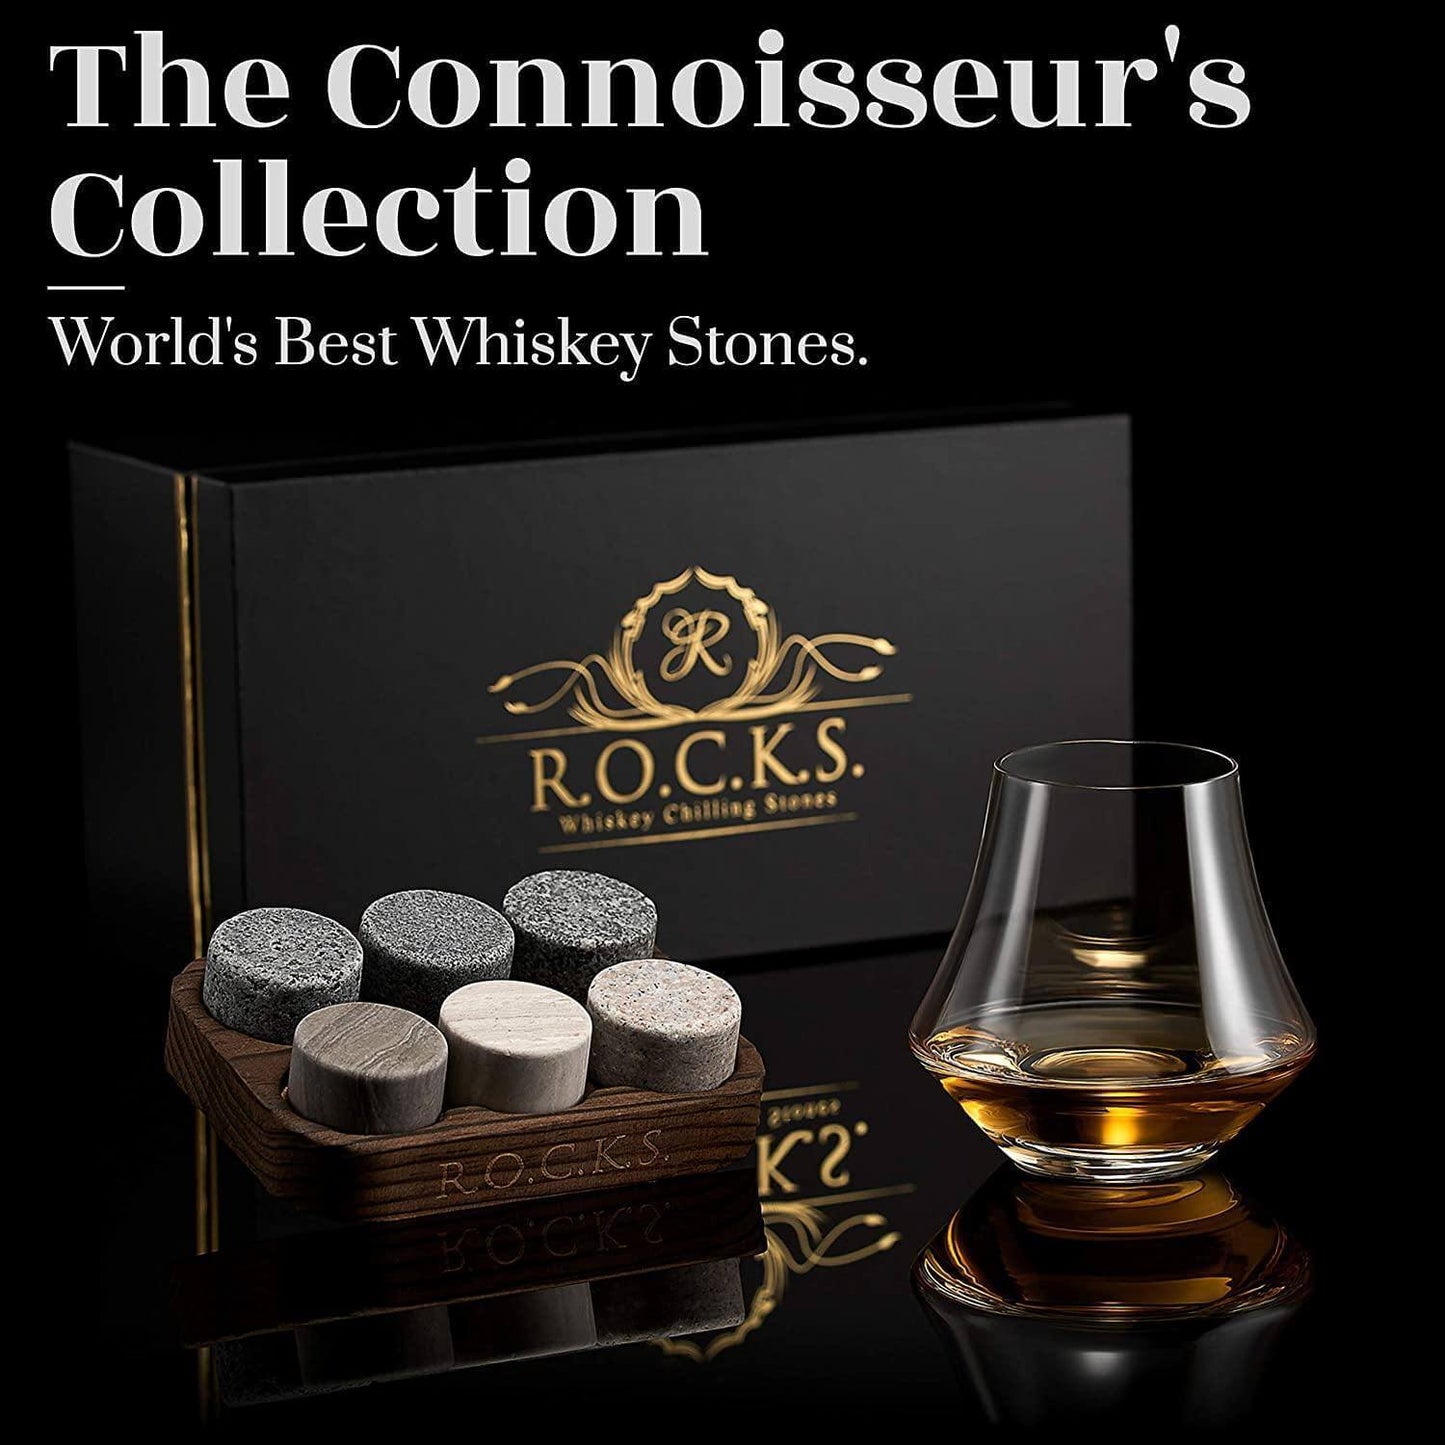 The Connoisseur's Set - Chilling Stones & Crystal Nosing Tasting Glass